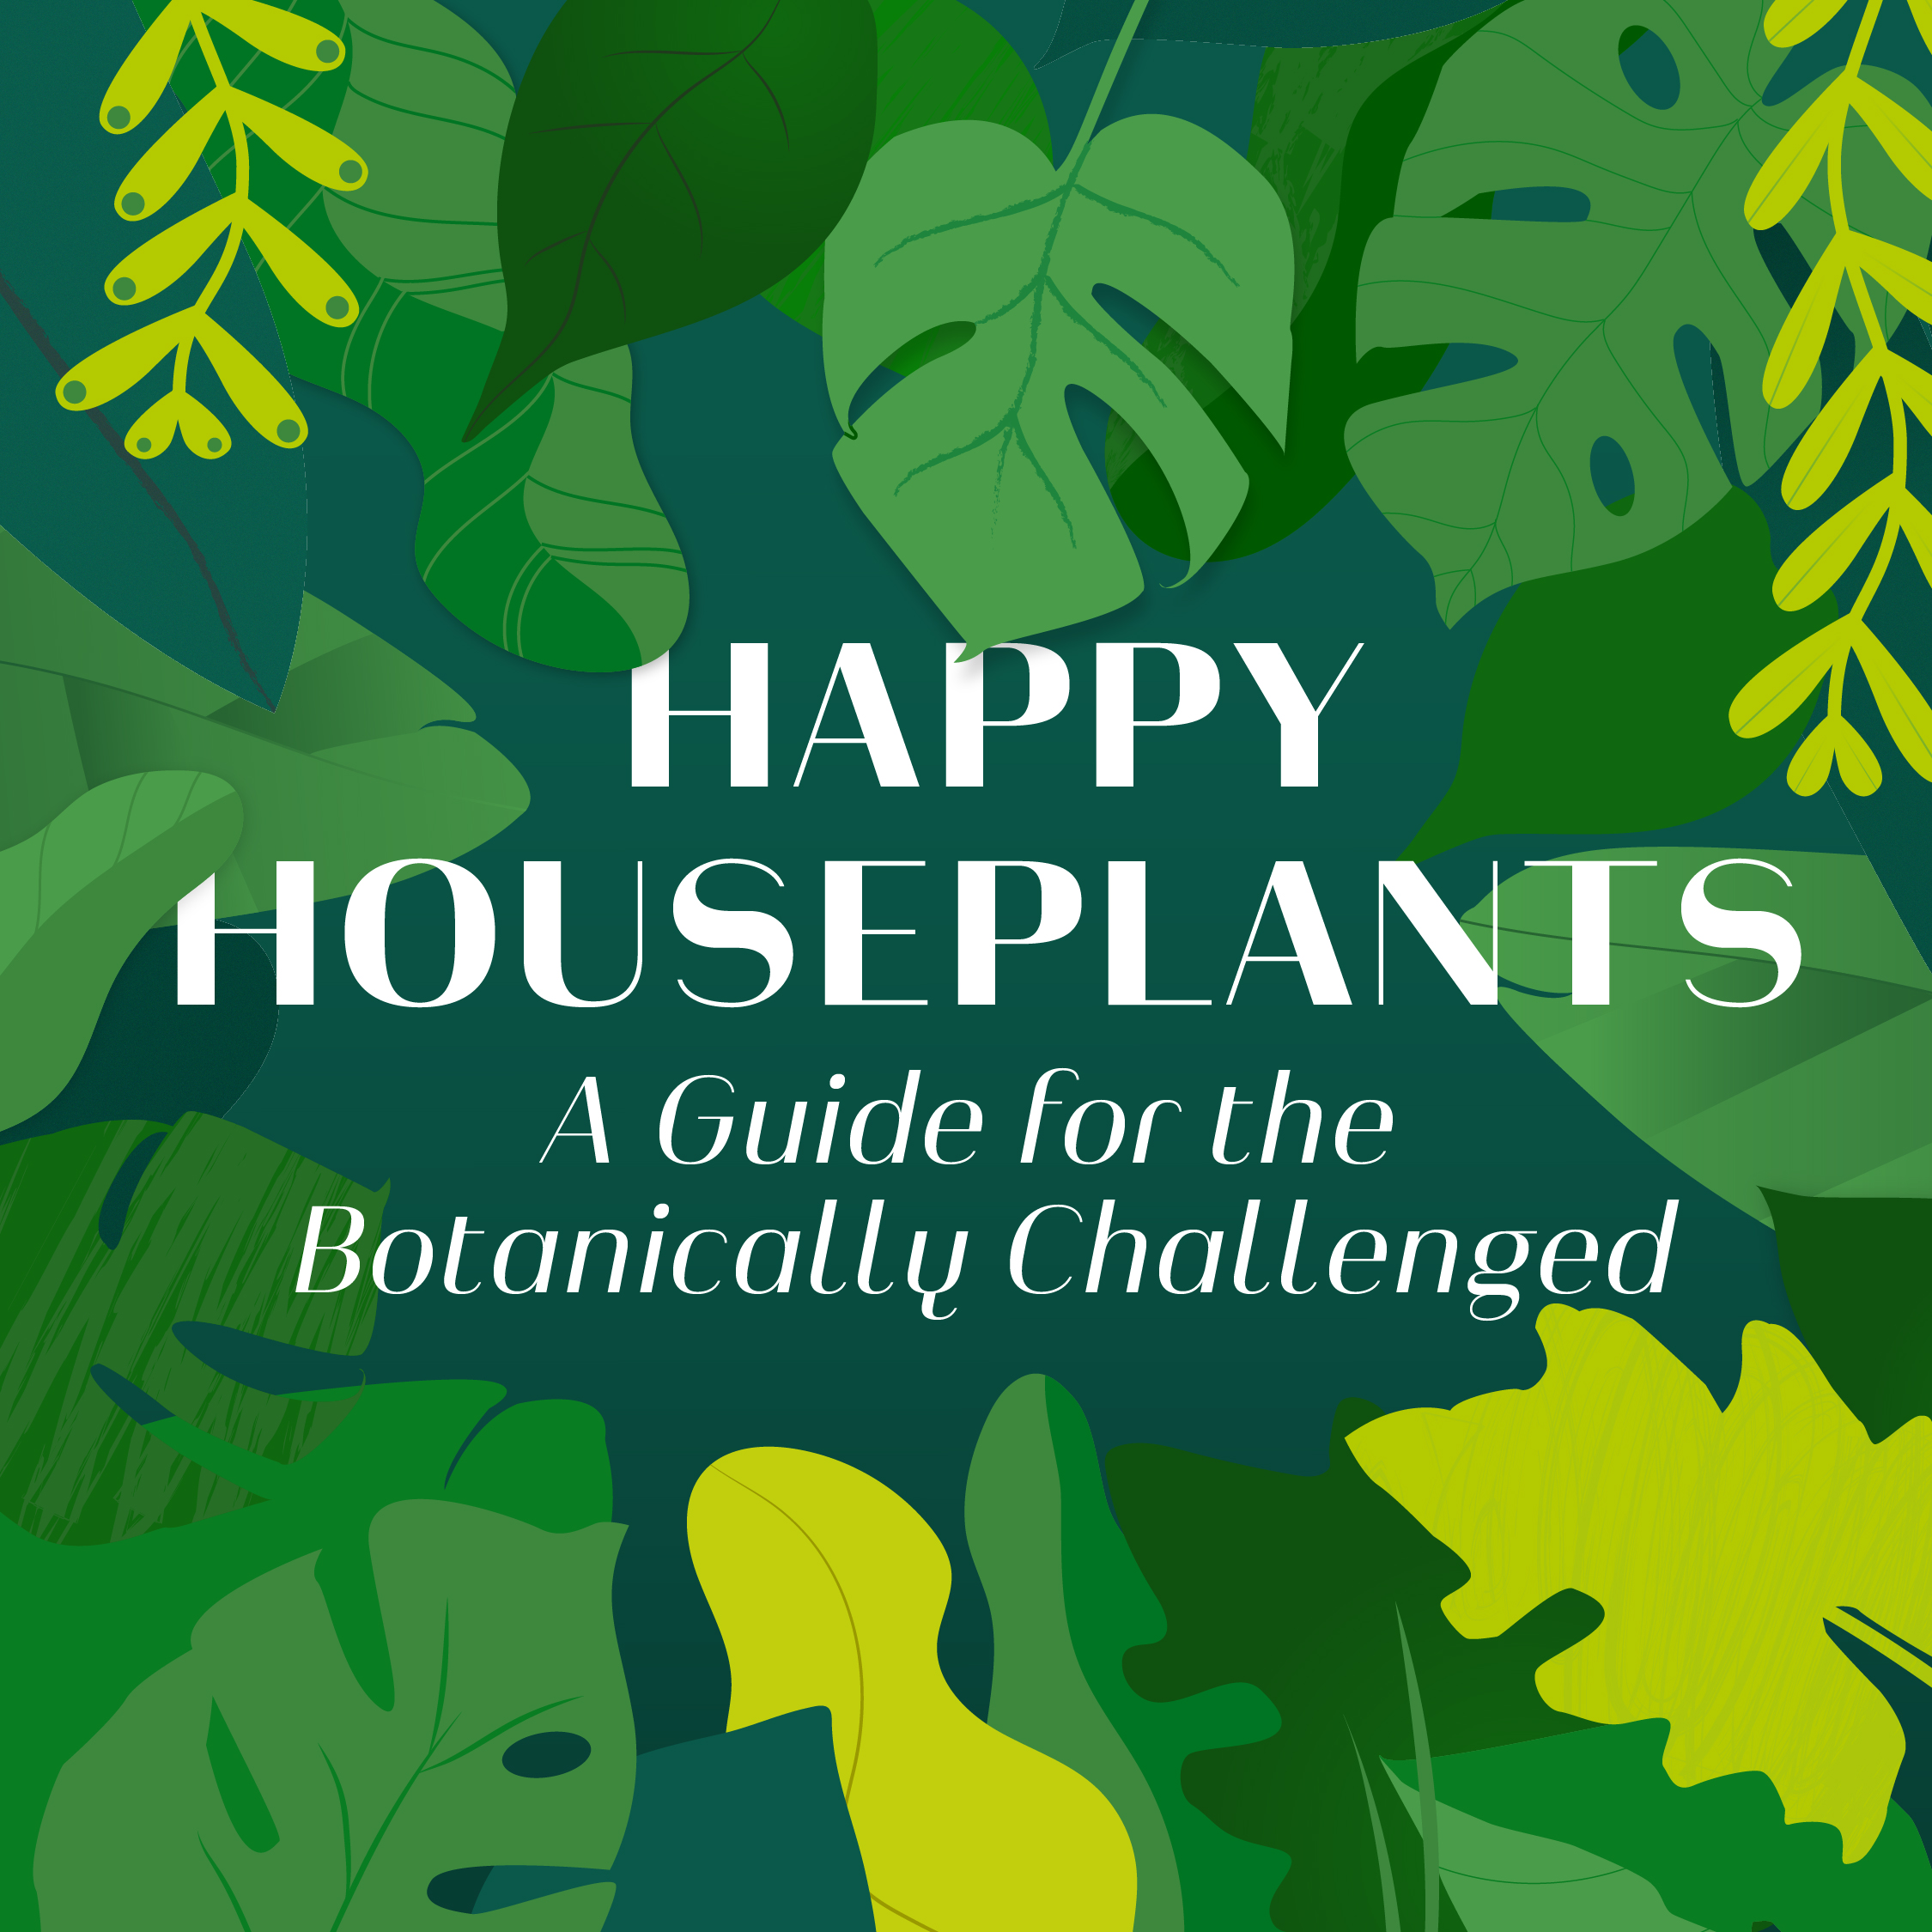 Happy Houseplants: A Guide for the Botanically Challenged